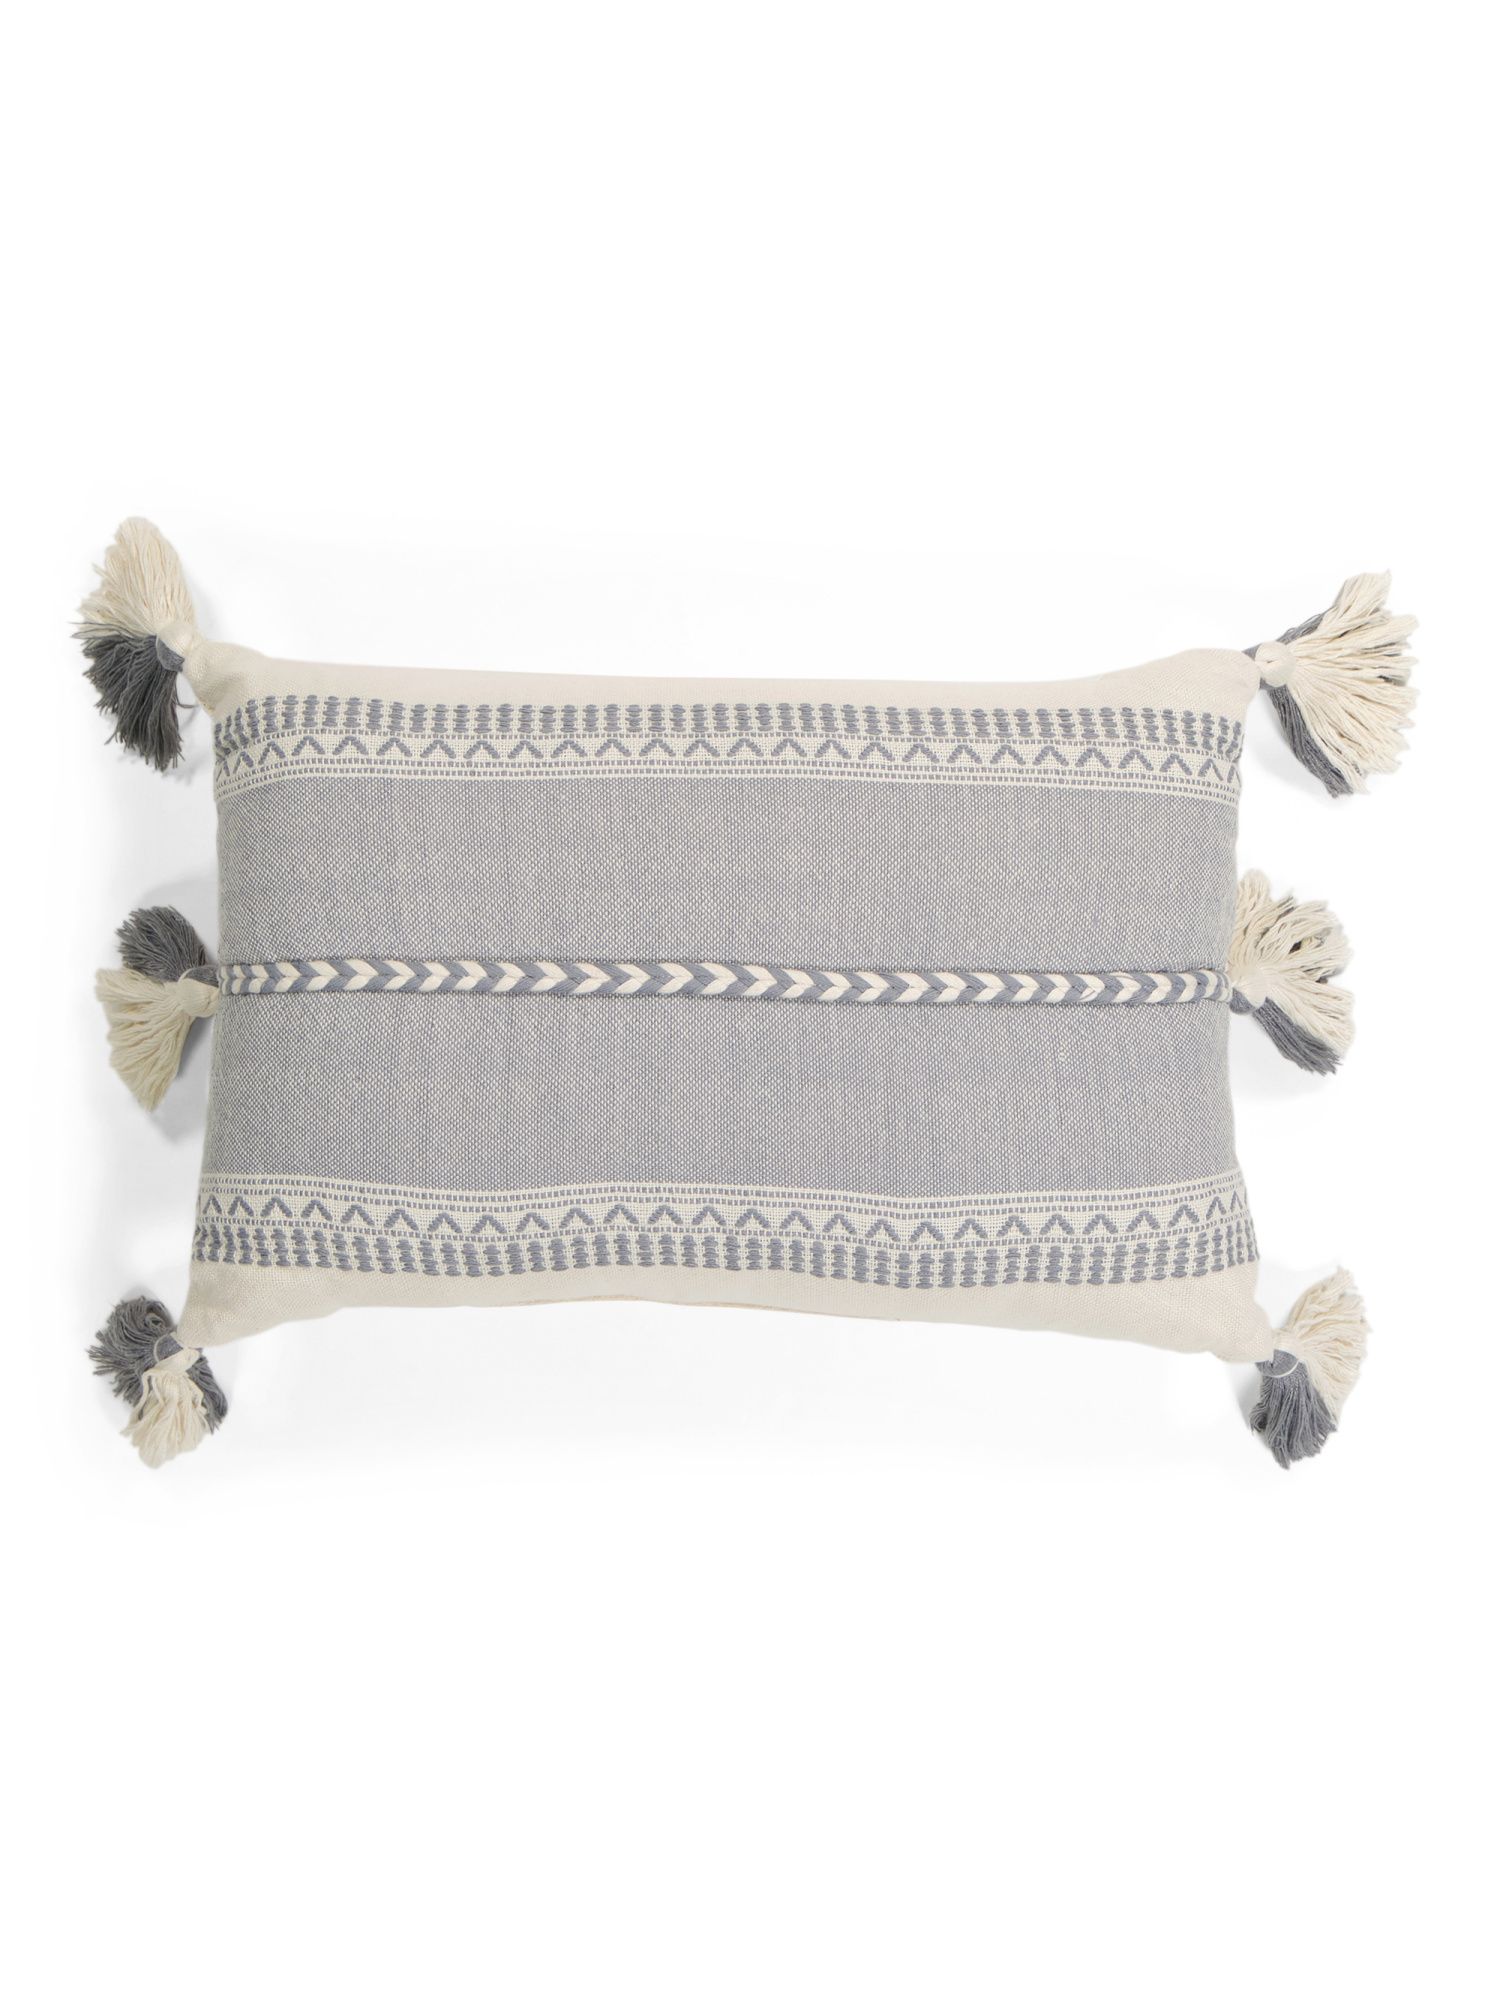 14x20 Indoor Outdoor Tassel And Striped Pillow | TJ Maxx